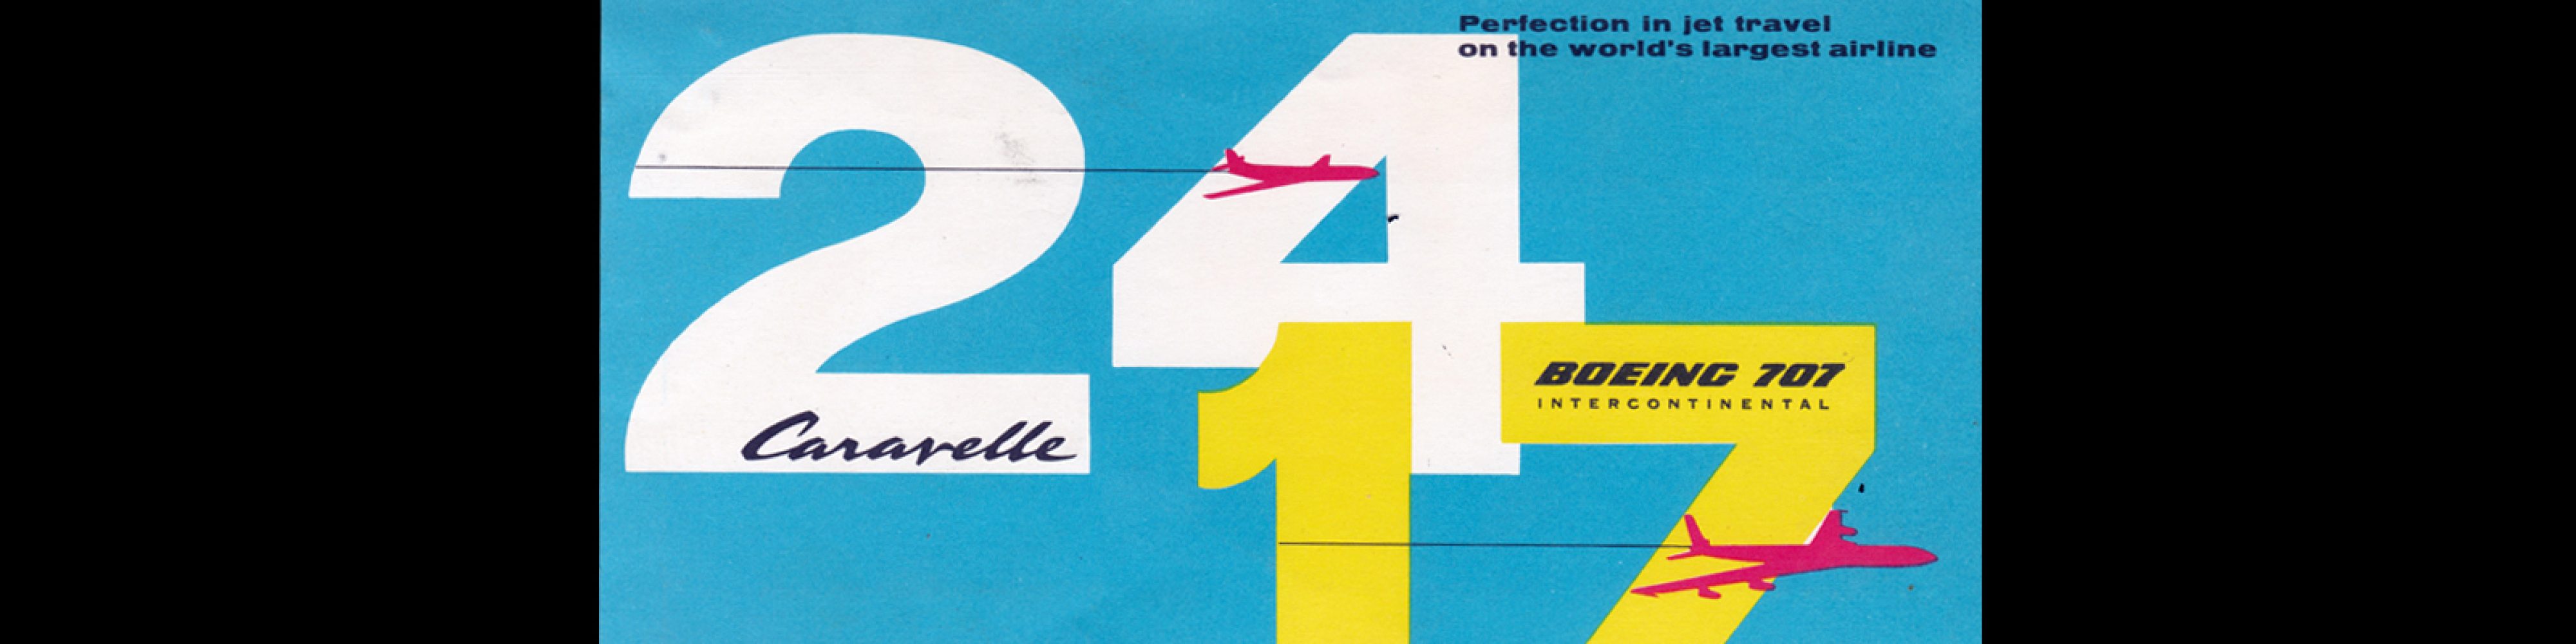 Air France - Boarding Pass 1959